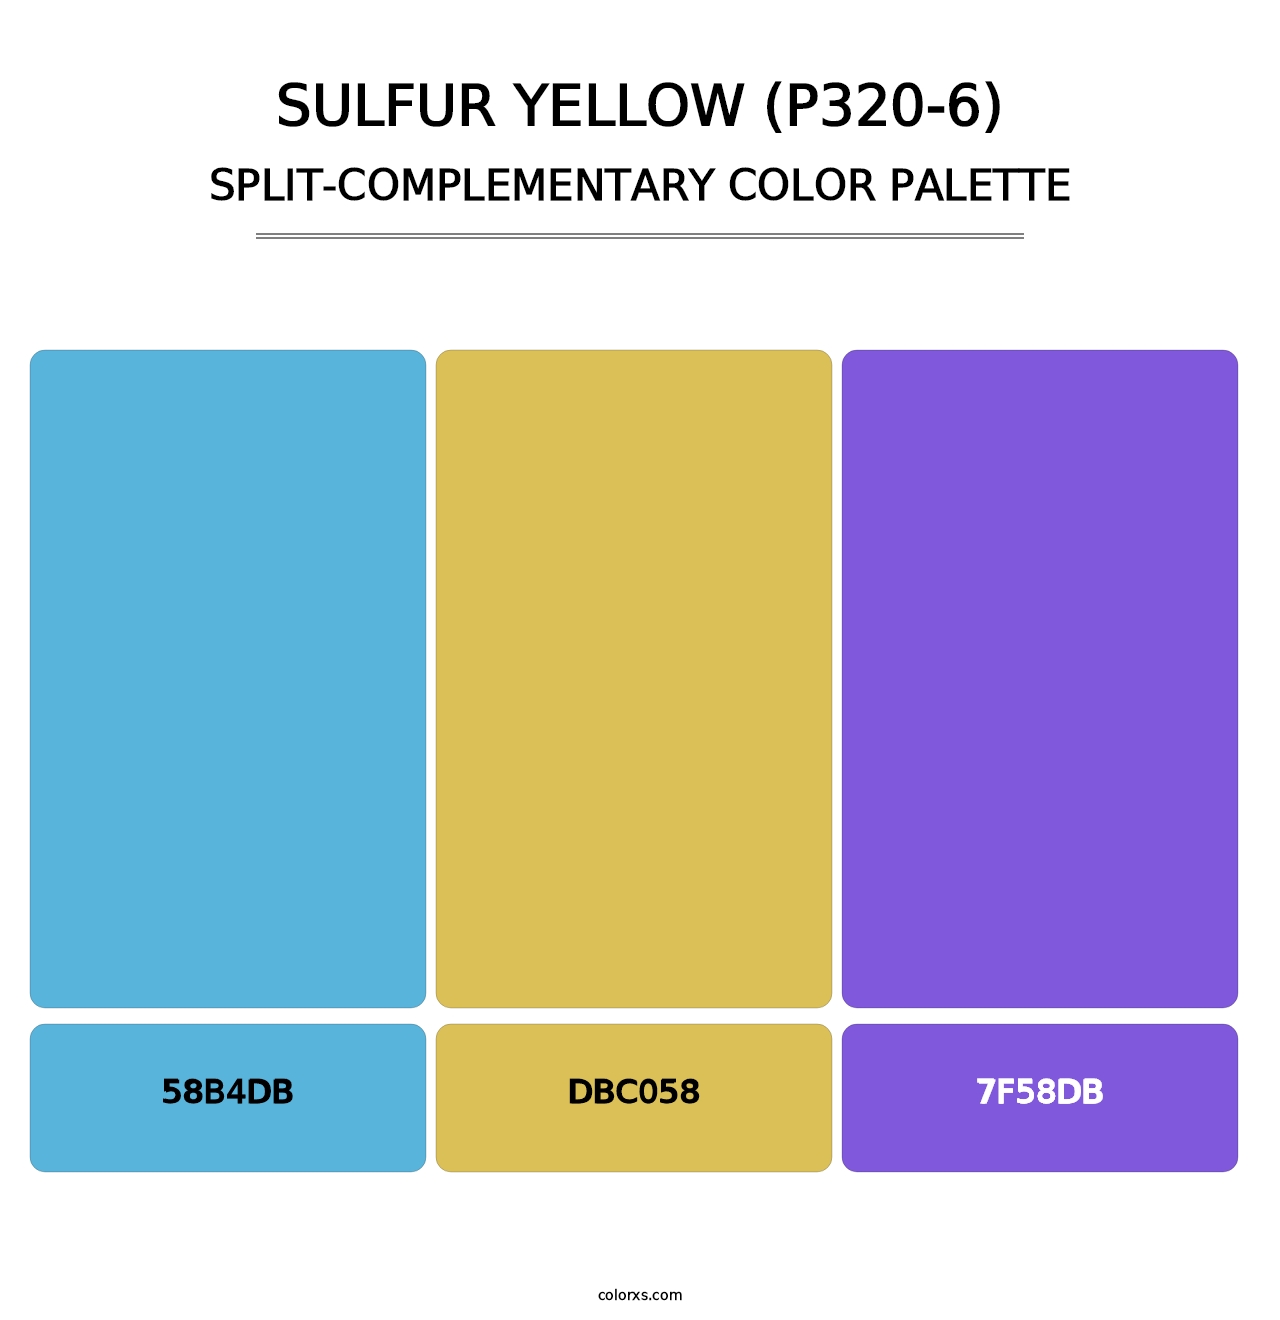 Sulfur Yellow (P320-6) - Split-Complementary Color Palette